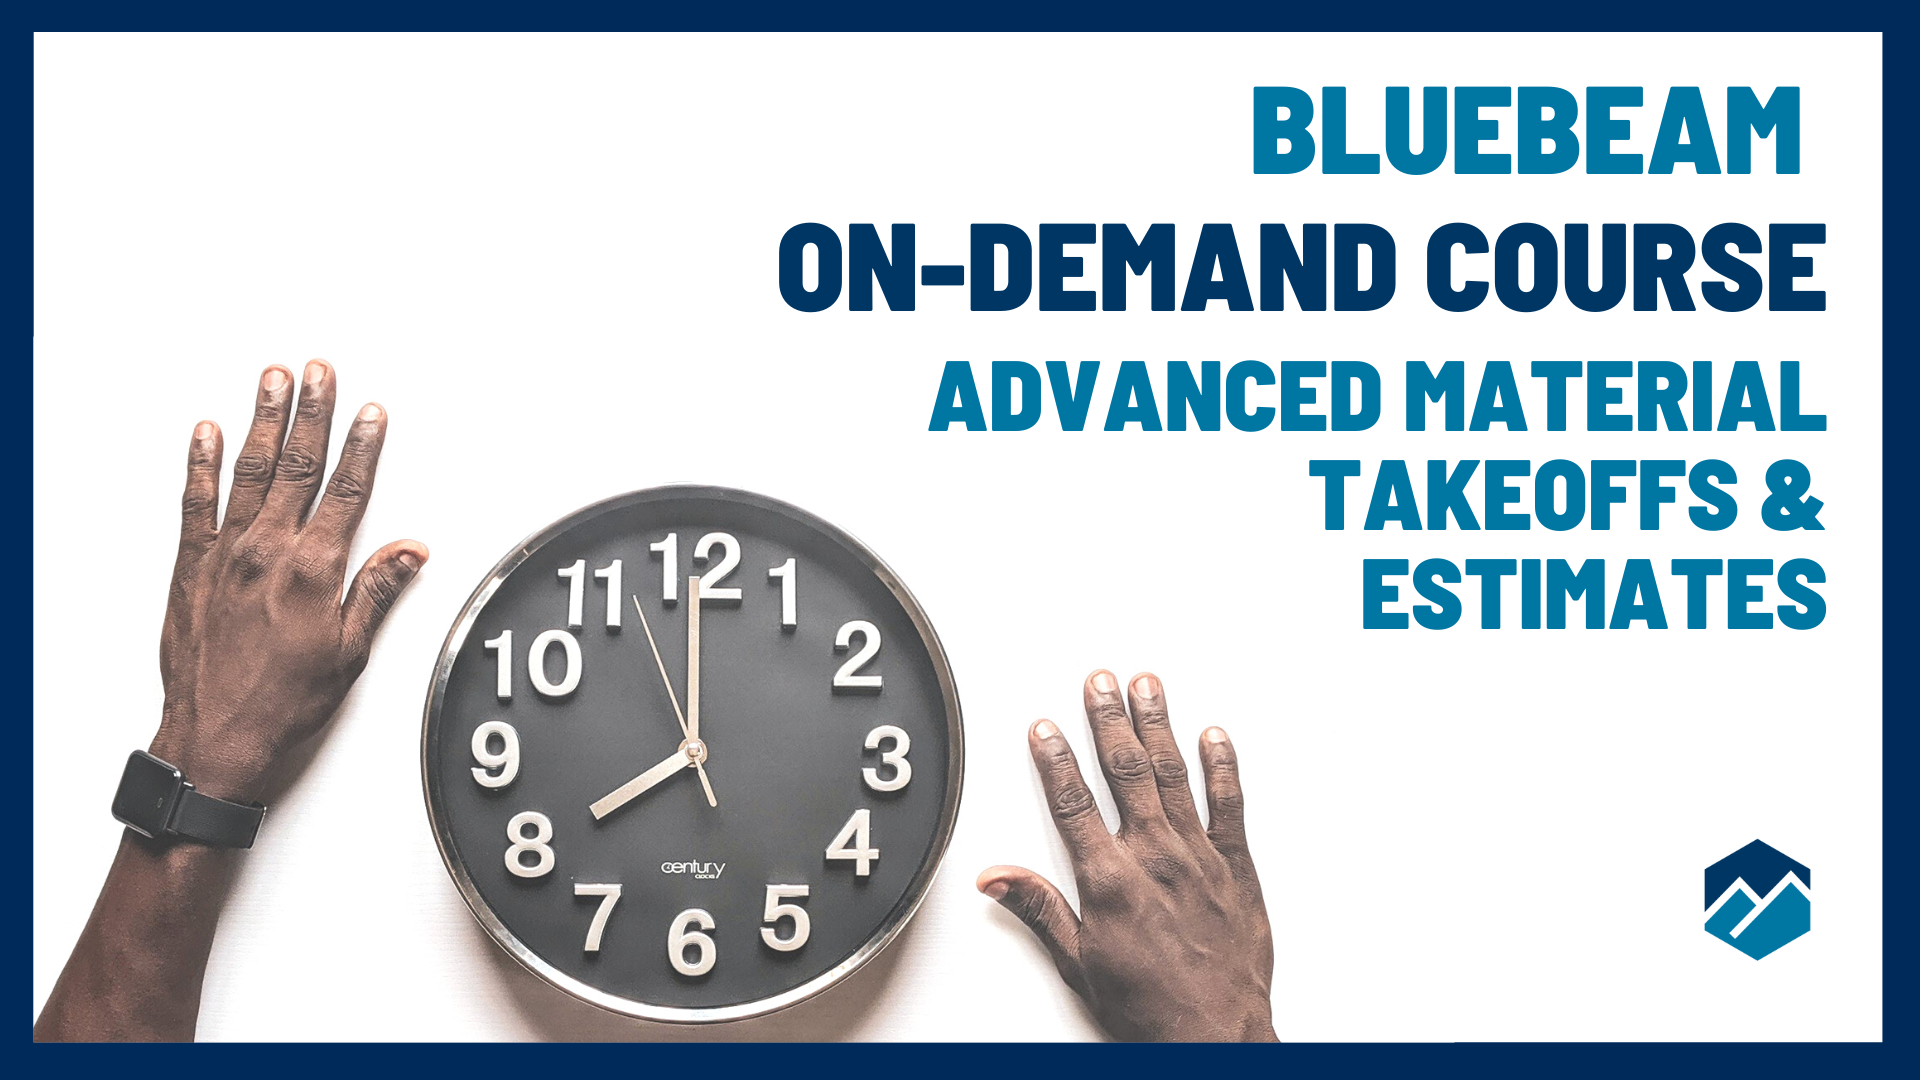 On Demand Course - Bluebeam Advanced Material Takeoffs & Estimates - UChapter2